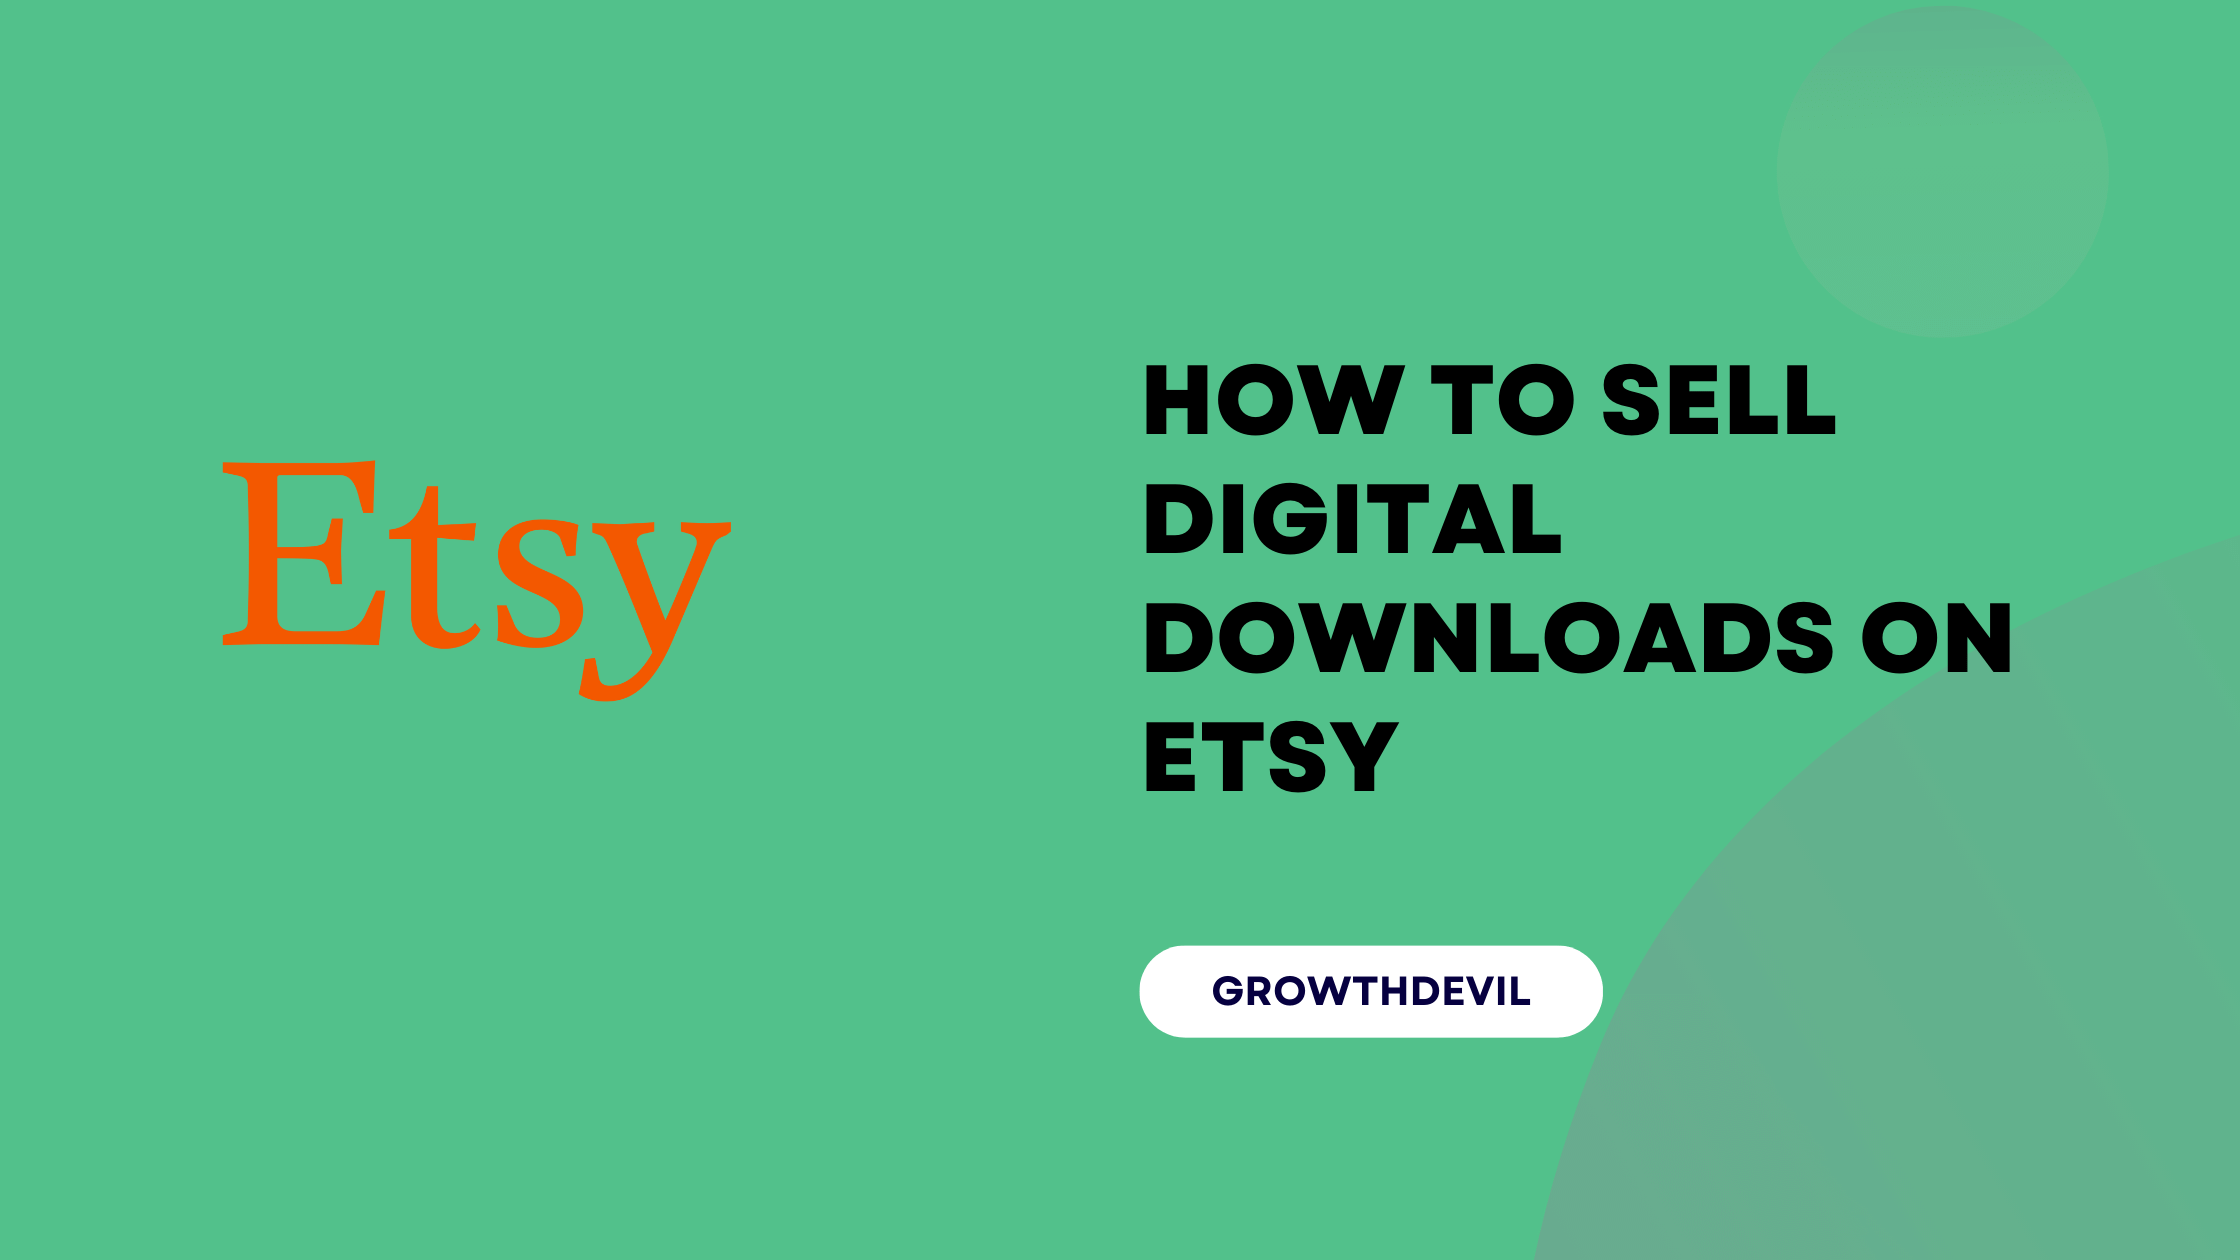 How To Sell Digital Downloads On Etsy - GrowthDevil